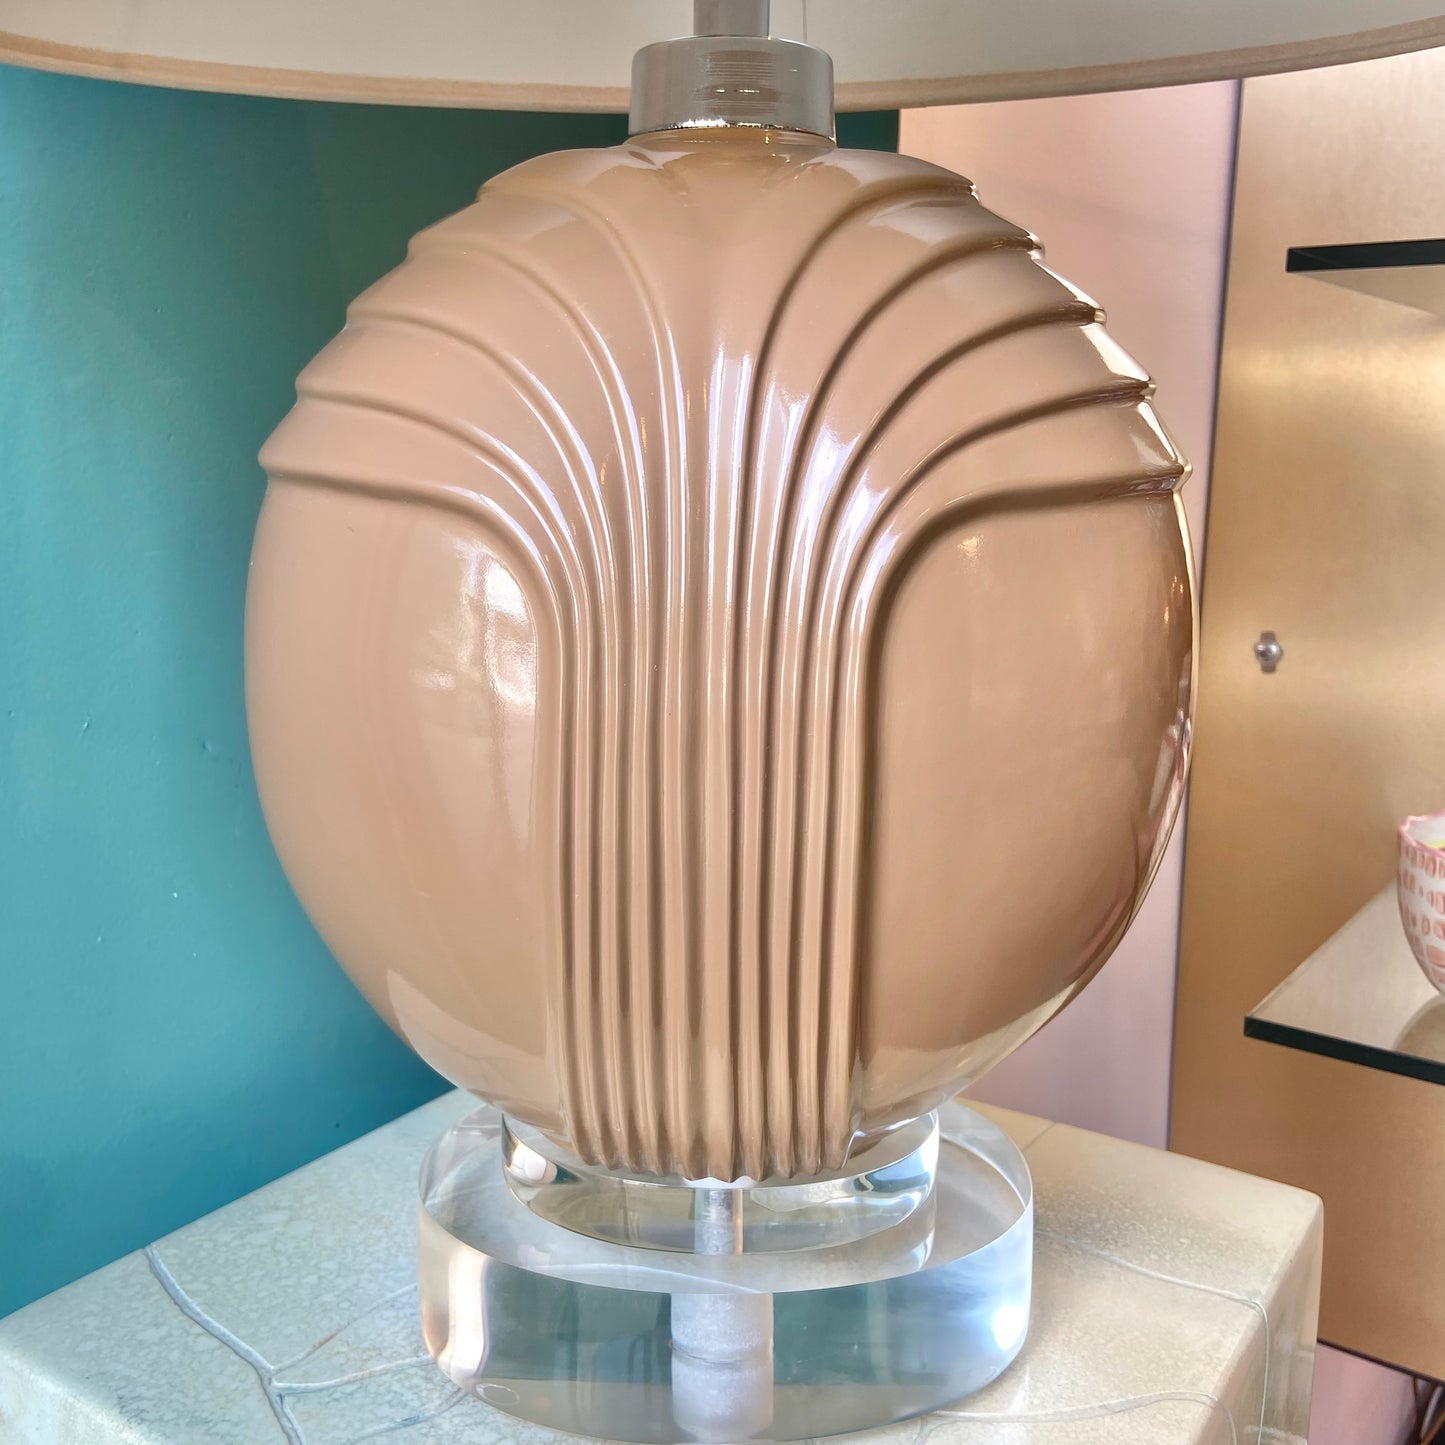 Vintage Art Deco Style Taupe Ceramic and Lucite Table Lamp